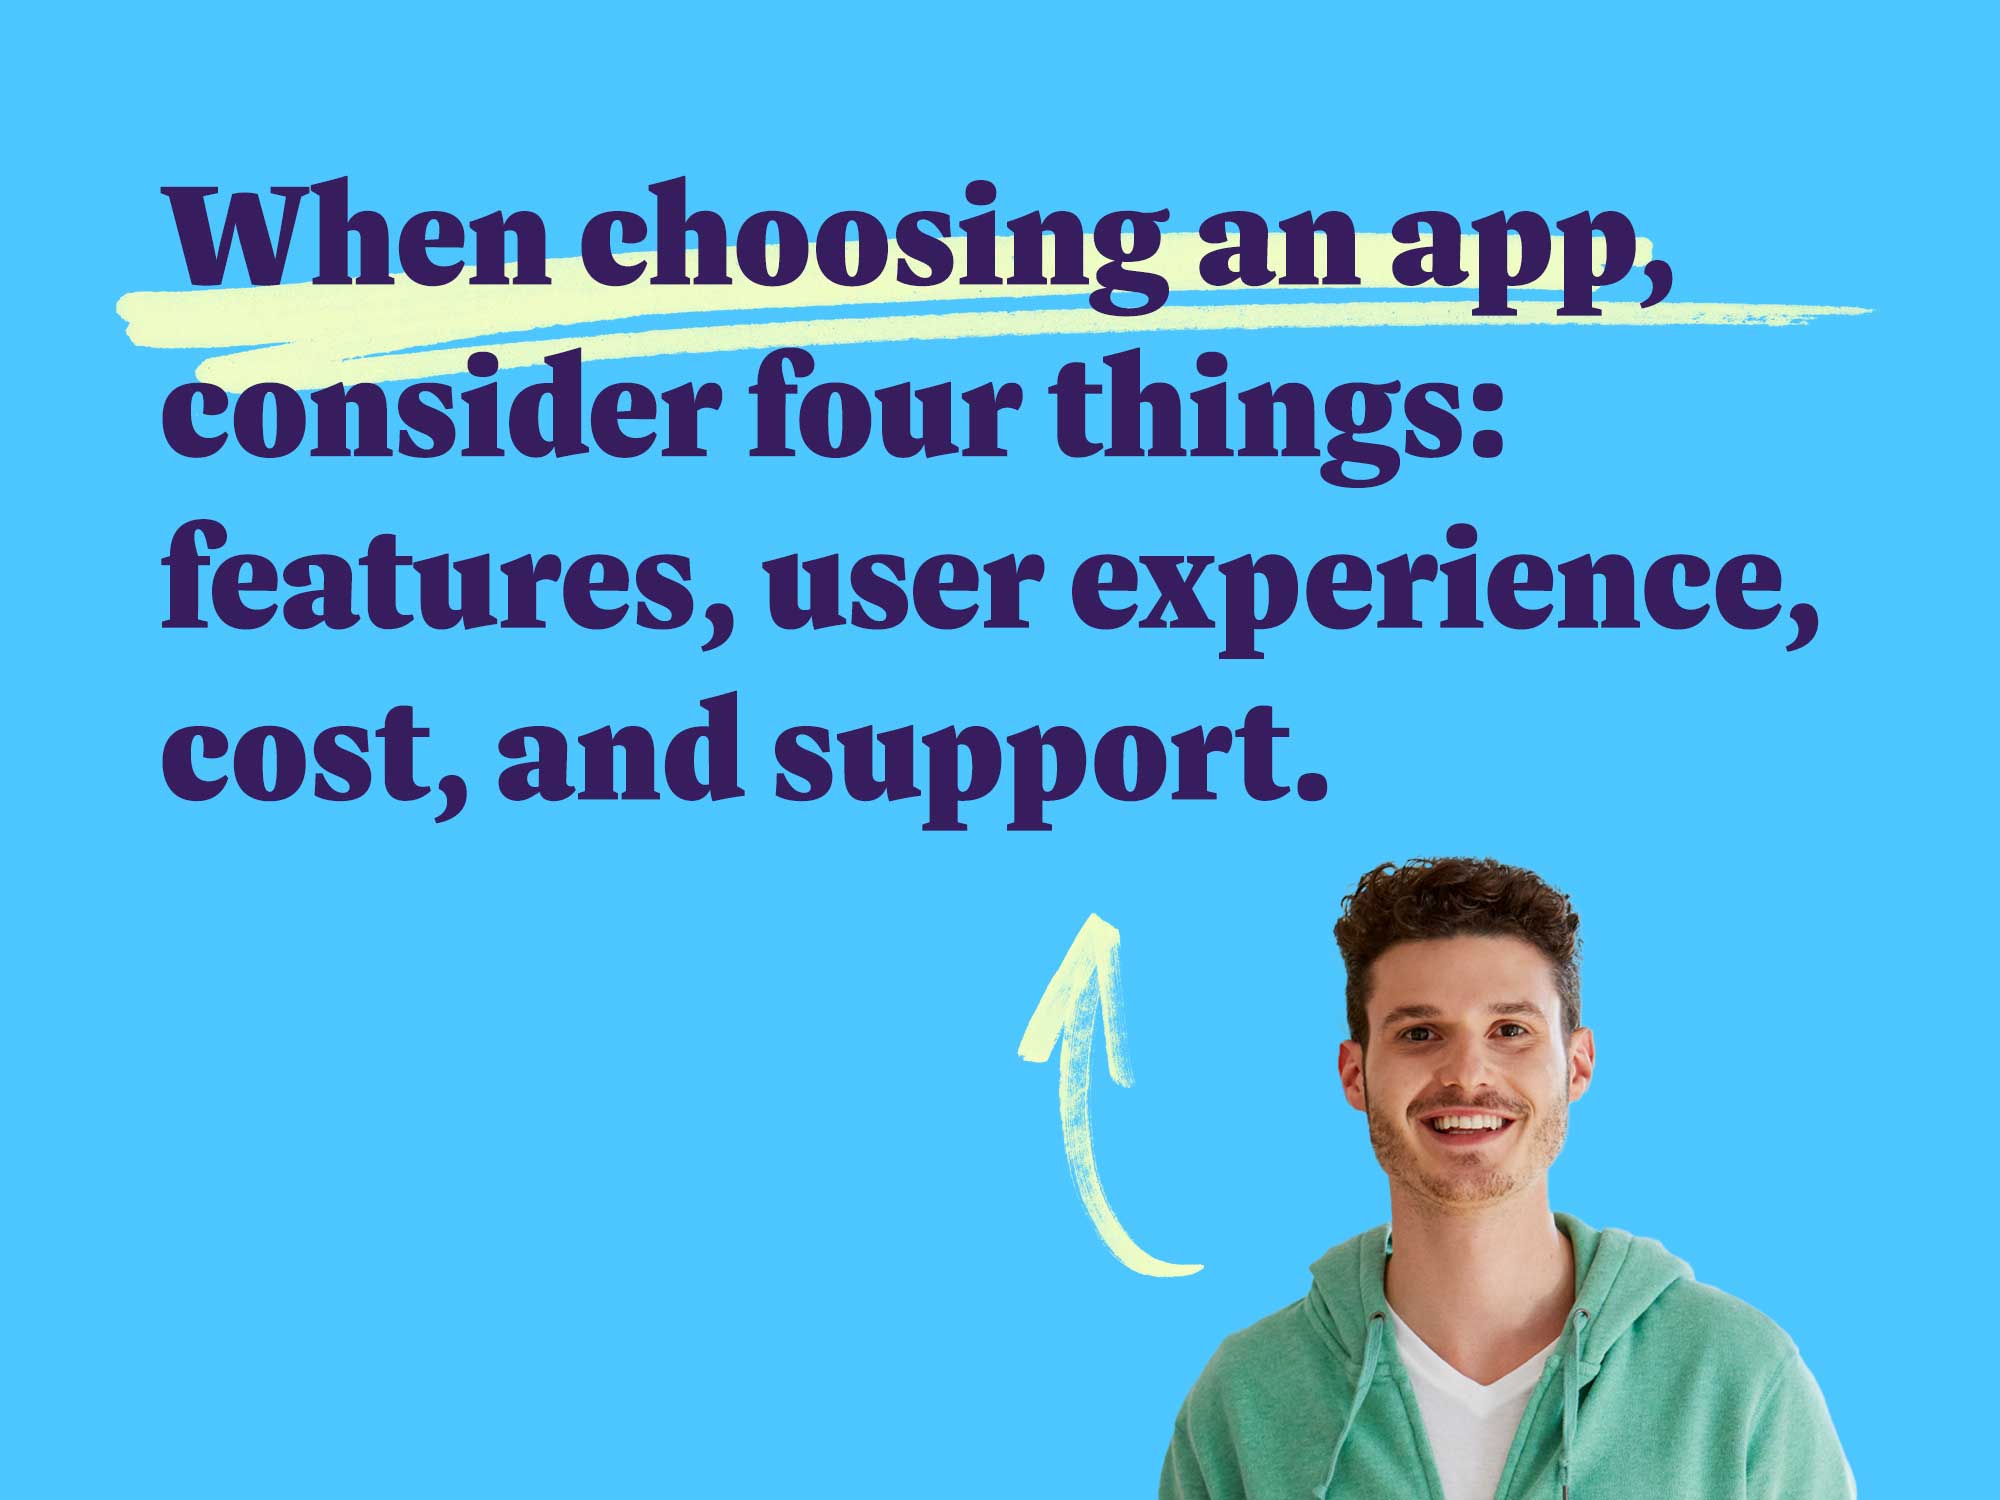 When choosing an app, consider four things: features, user experience, cost, and support.